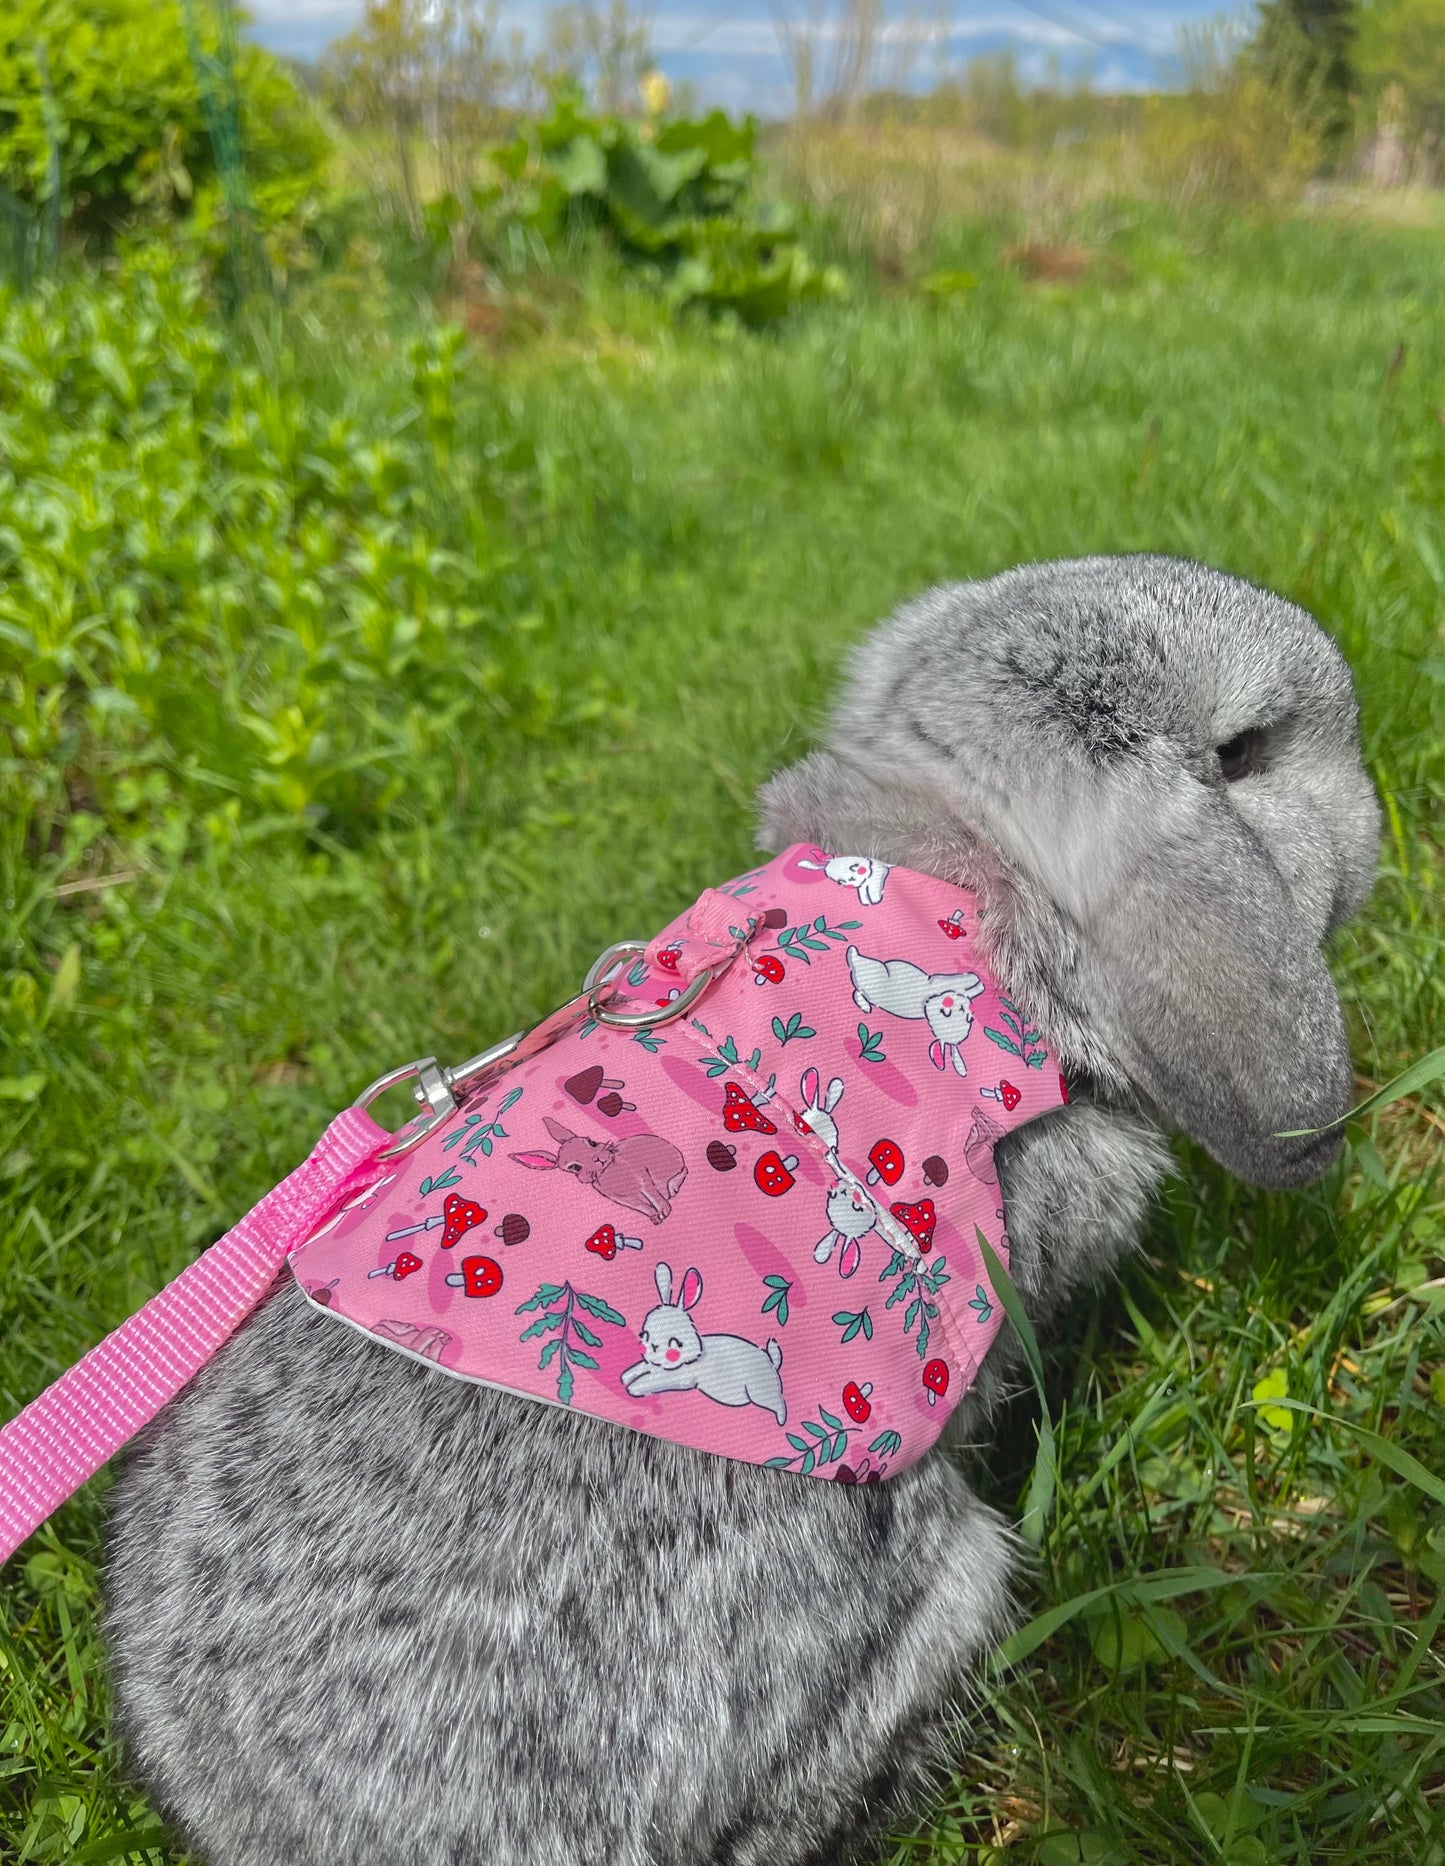 Bunny harness - walk in the forest